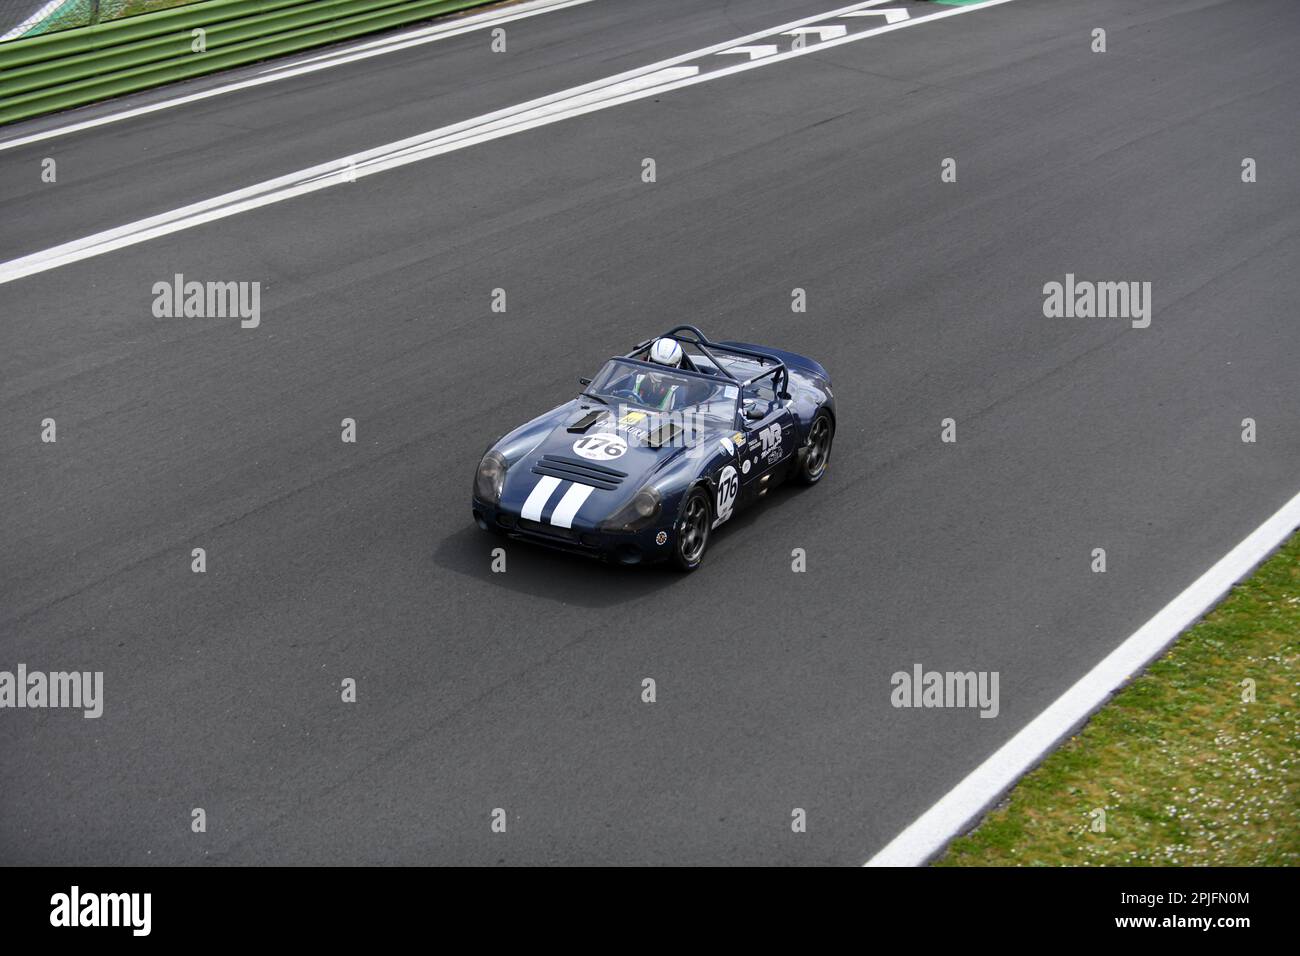 Vallelunga 'Piero Taruffi' circuit, Racing weekend, April 2nd 2023, Italy. Motorsport Historical car race, 300 Km di Vallelunga. TVR Tuscan speed 8 GT in action during the race. Photo Credit: Fabio Pagani/Alamy Live News Stock Photo